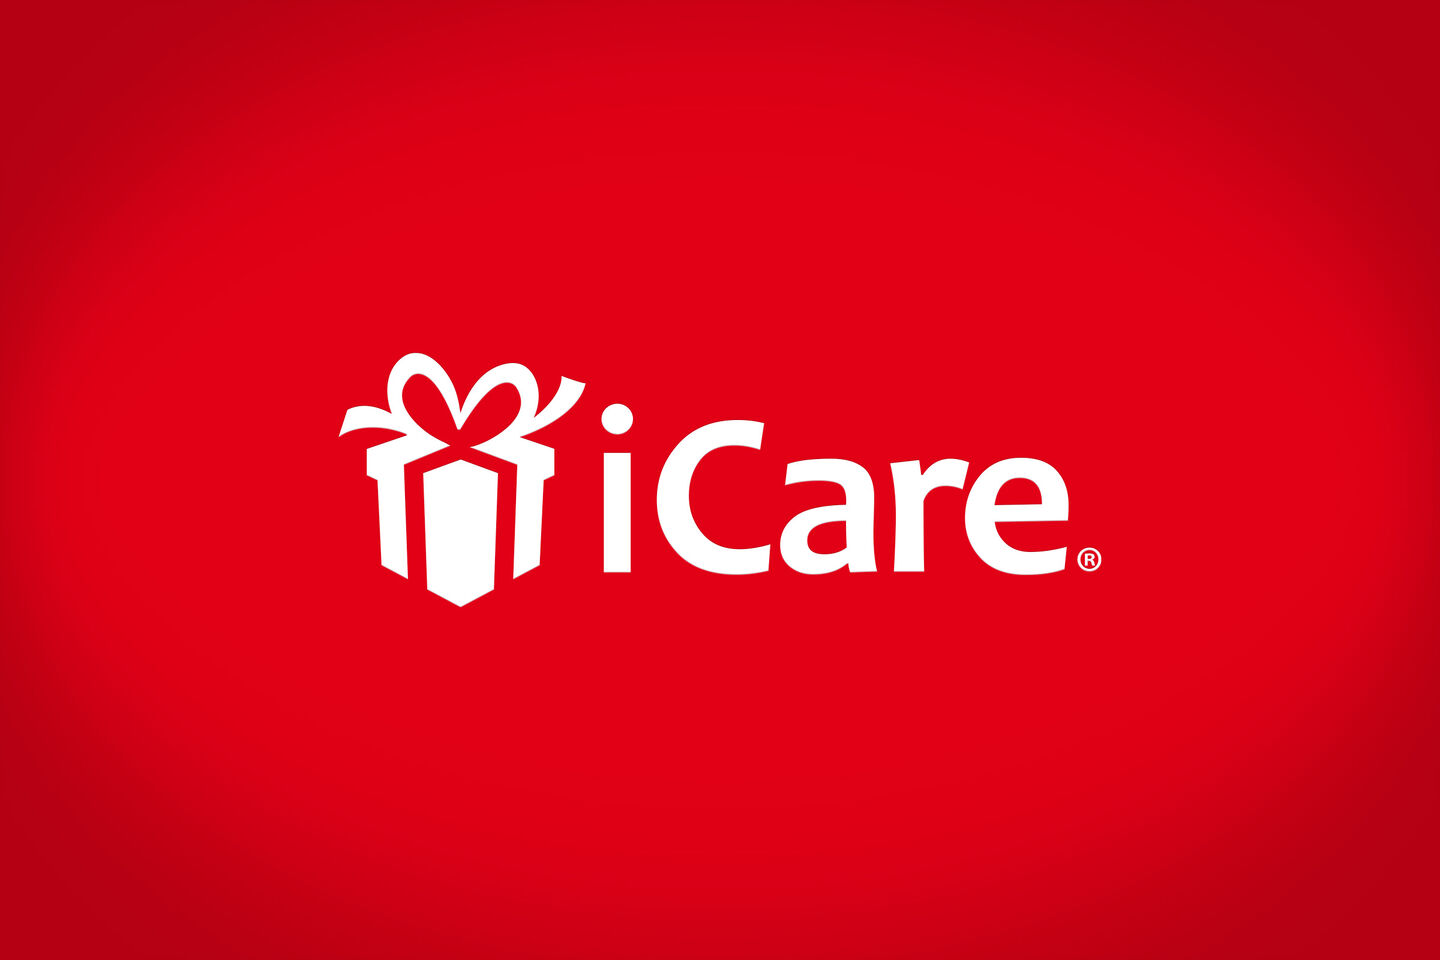 iCare logo on red background